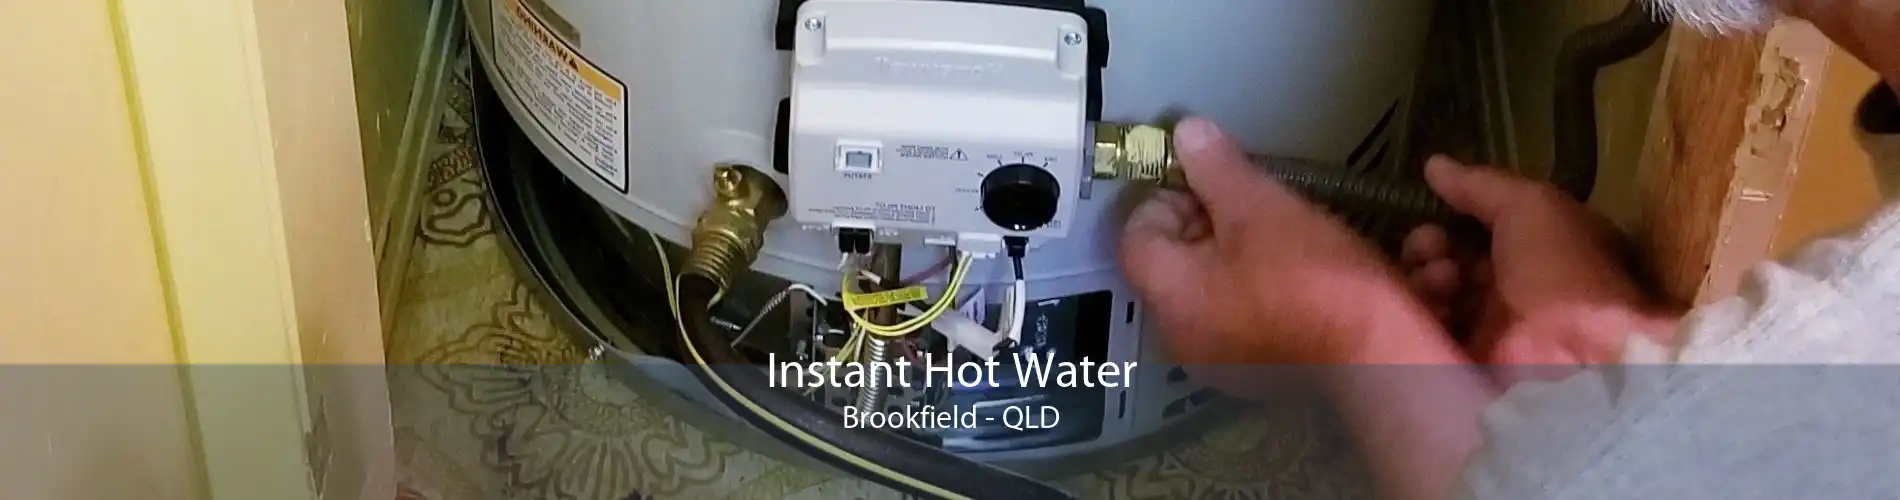 Instant Hot Water Brookfield - QLD